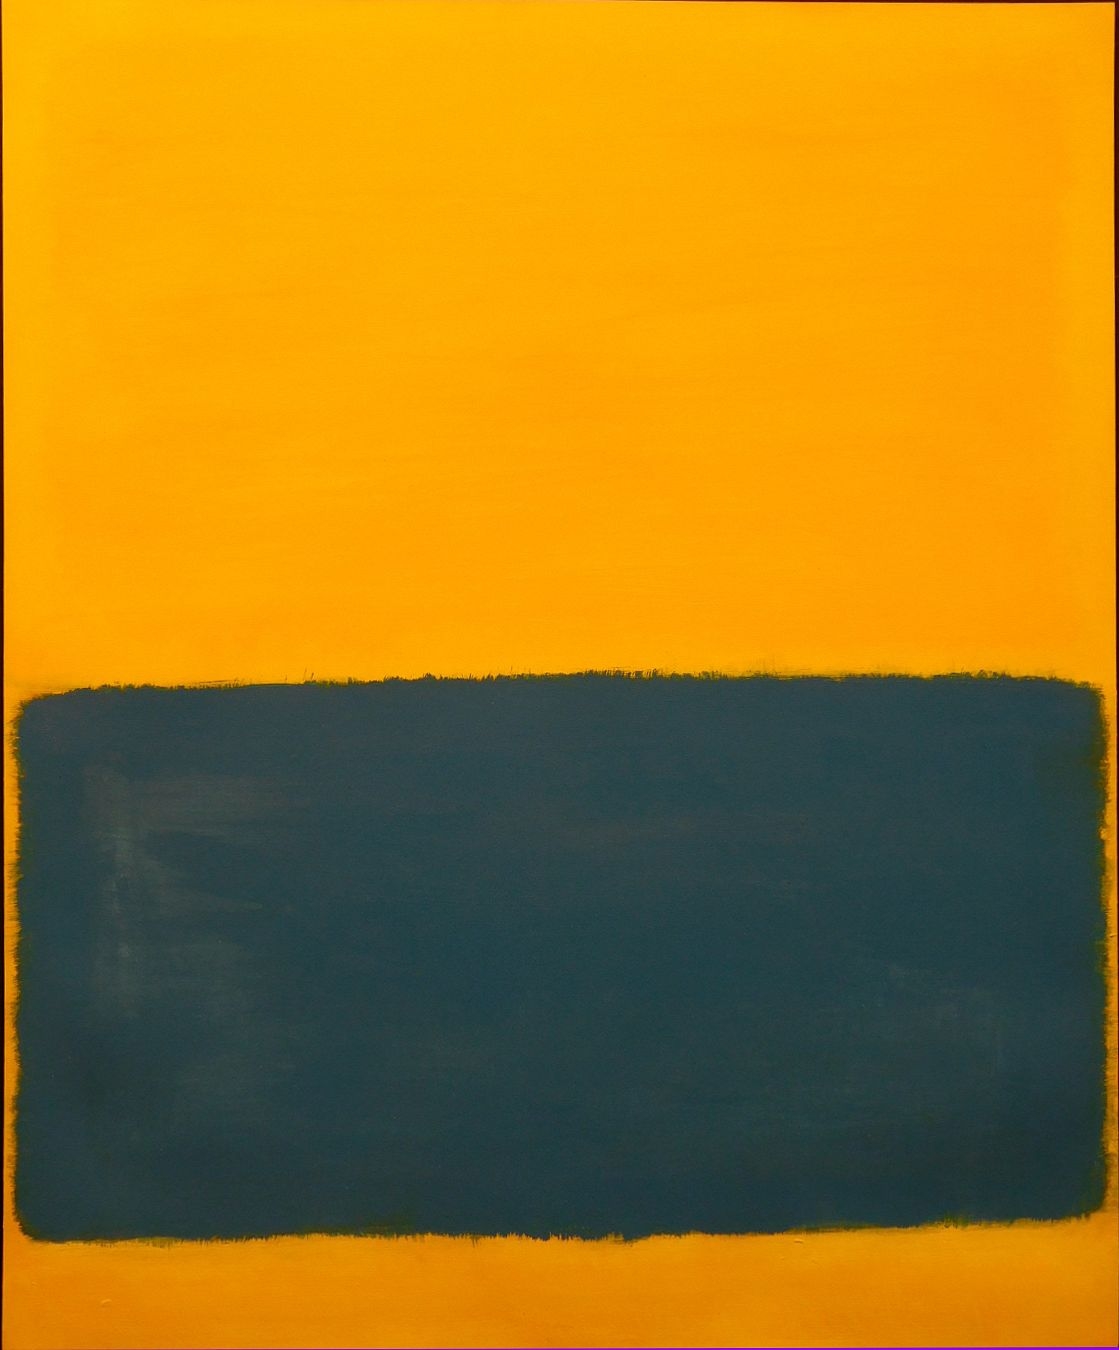 Artwork by Mark Rothko, Untitled (Abstract Yellow and Blue), Made of Oil on canvas paper